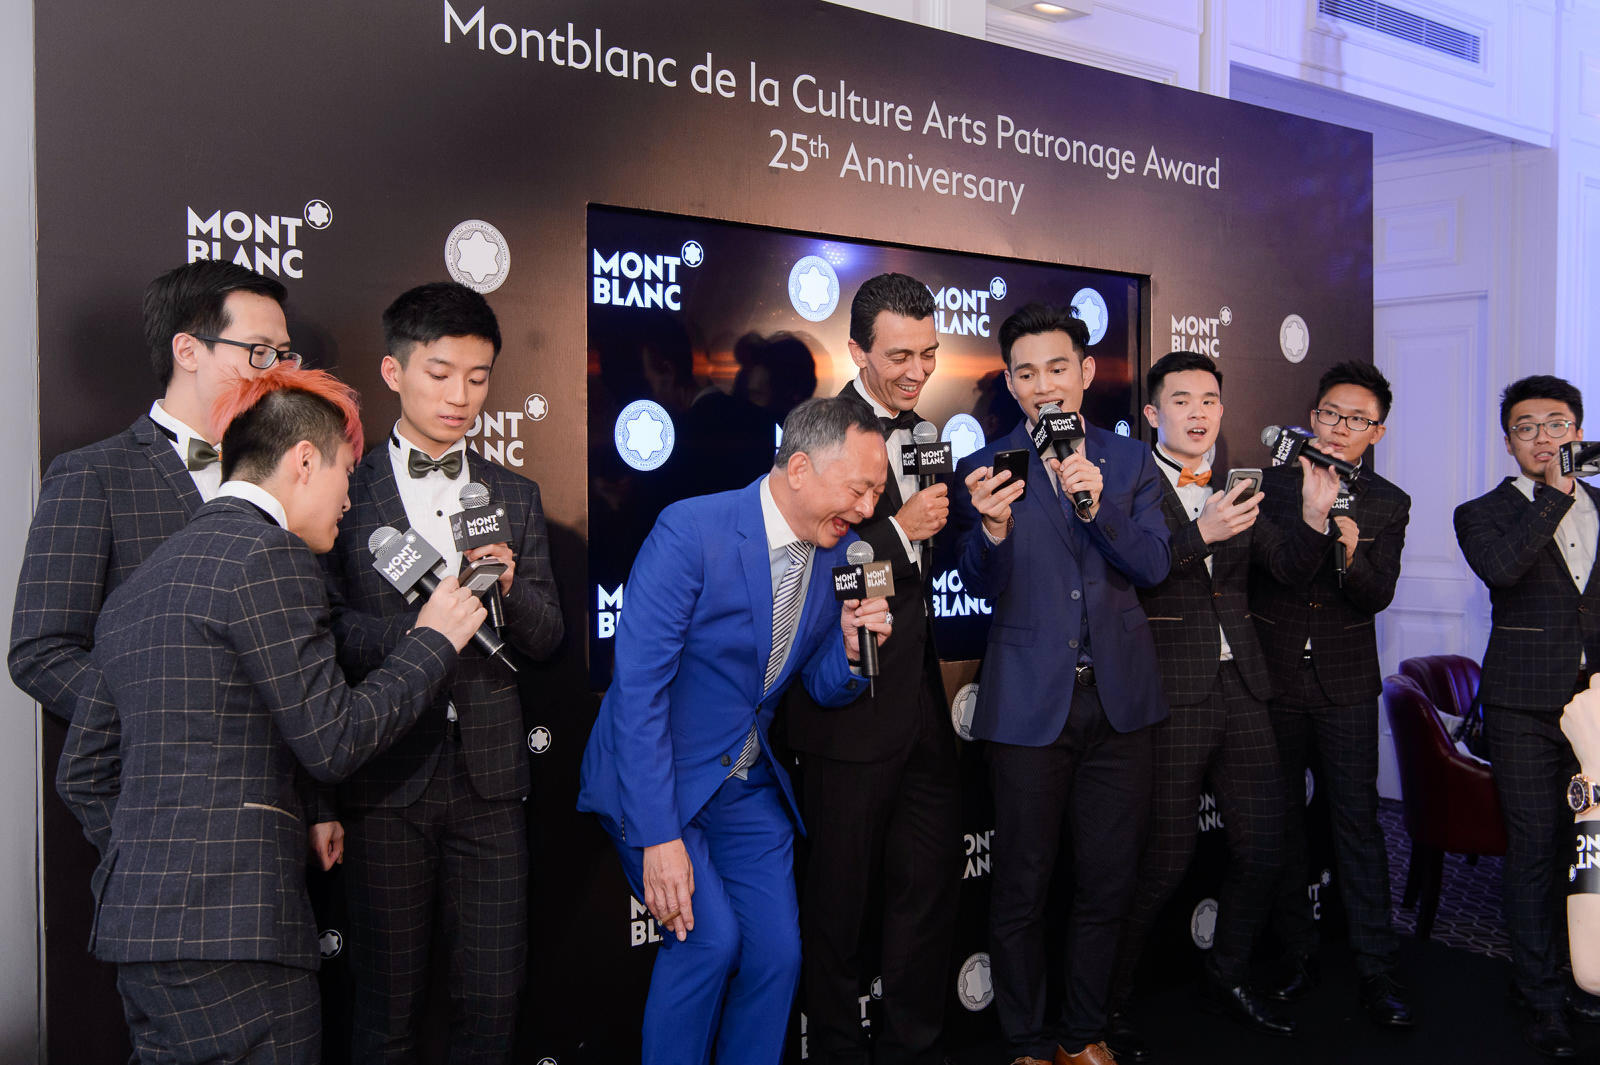 Johnnie To jamming with Julien Renard and Jonathan Wong at the Montblanc soiree.